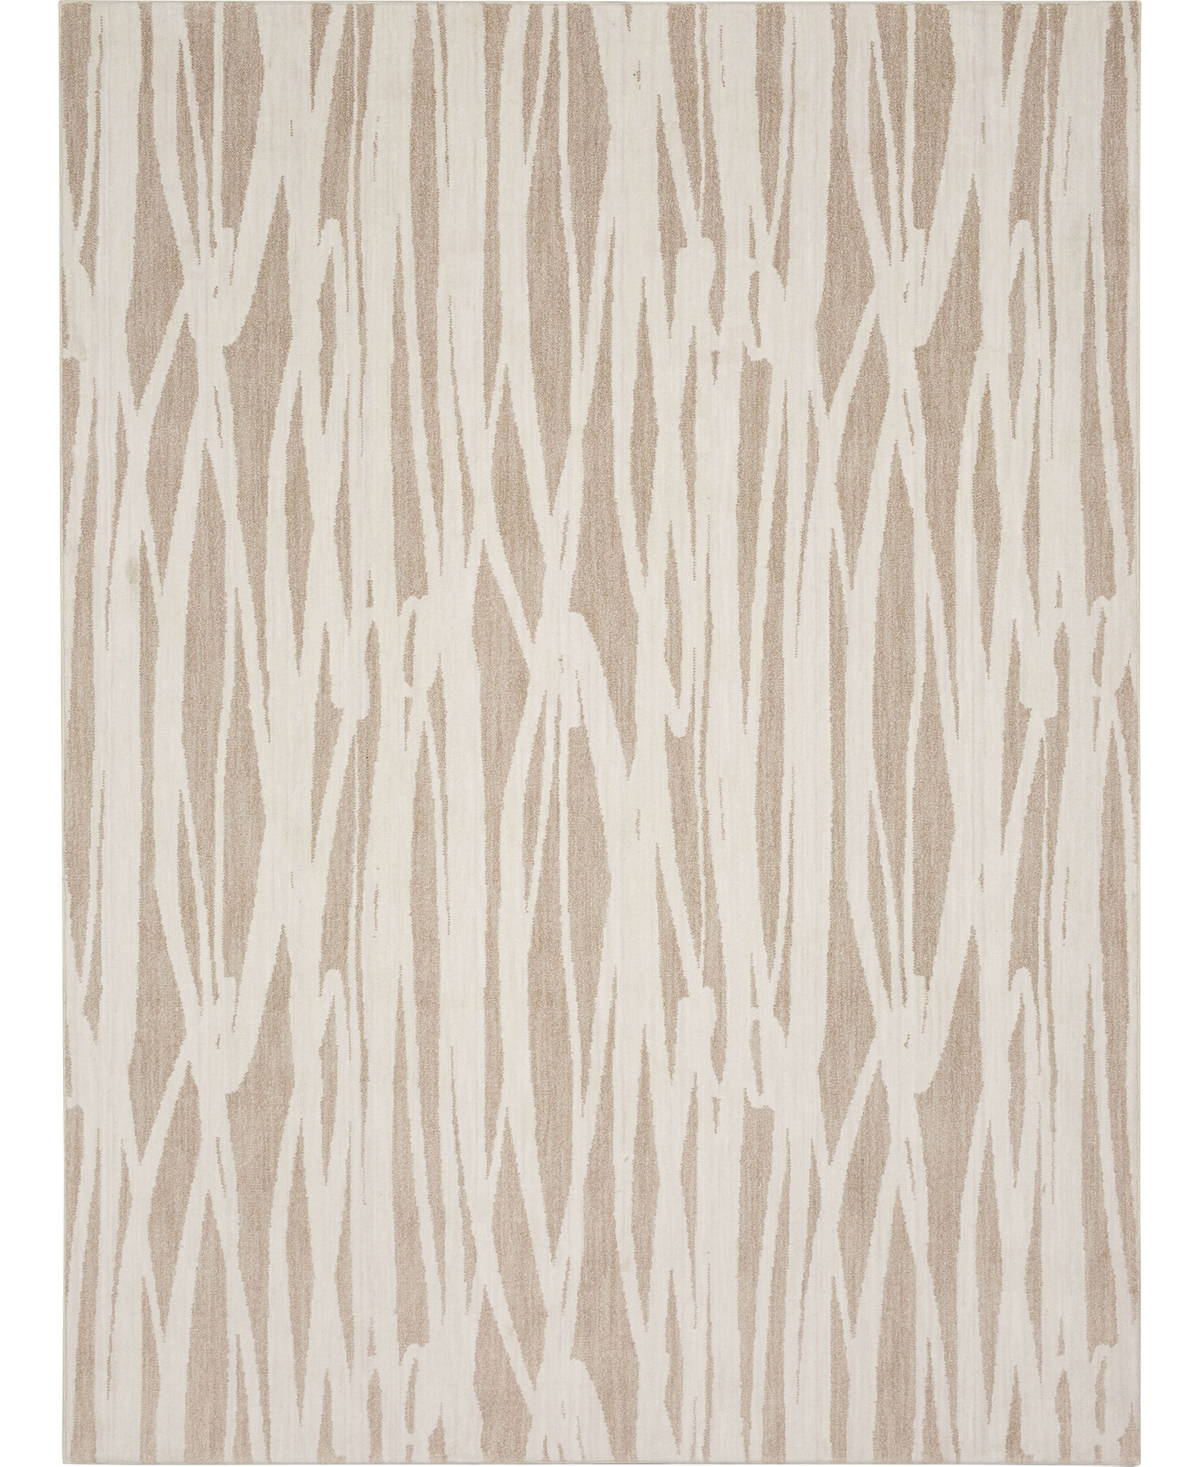 Stacy Garcia Home Rendition Mezzo 5'3in x 7'10in Area Rug - Ivory